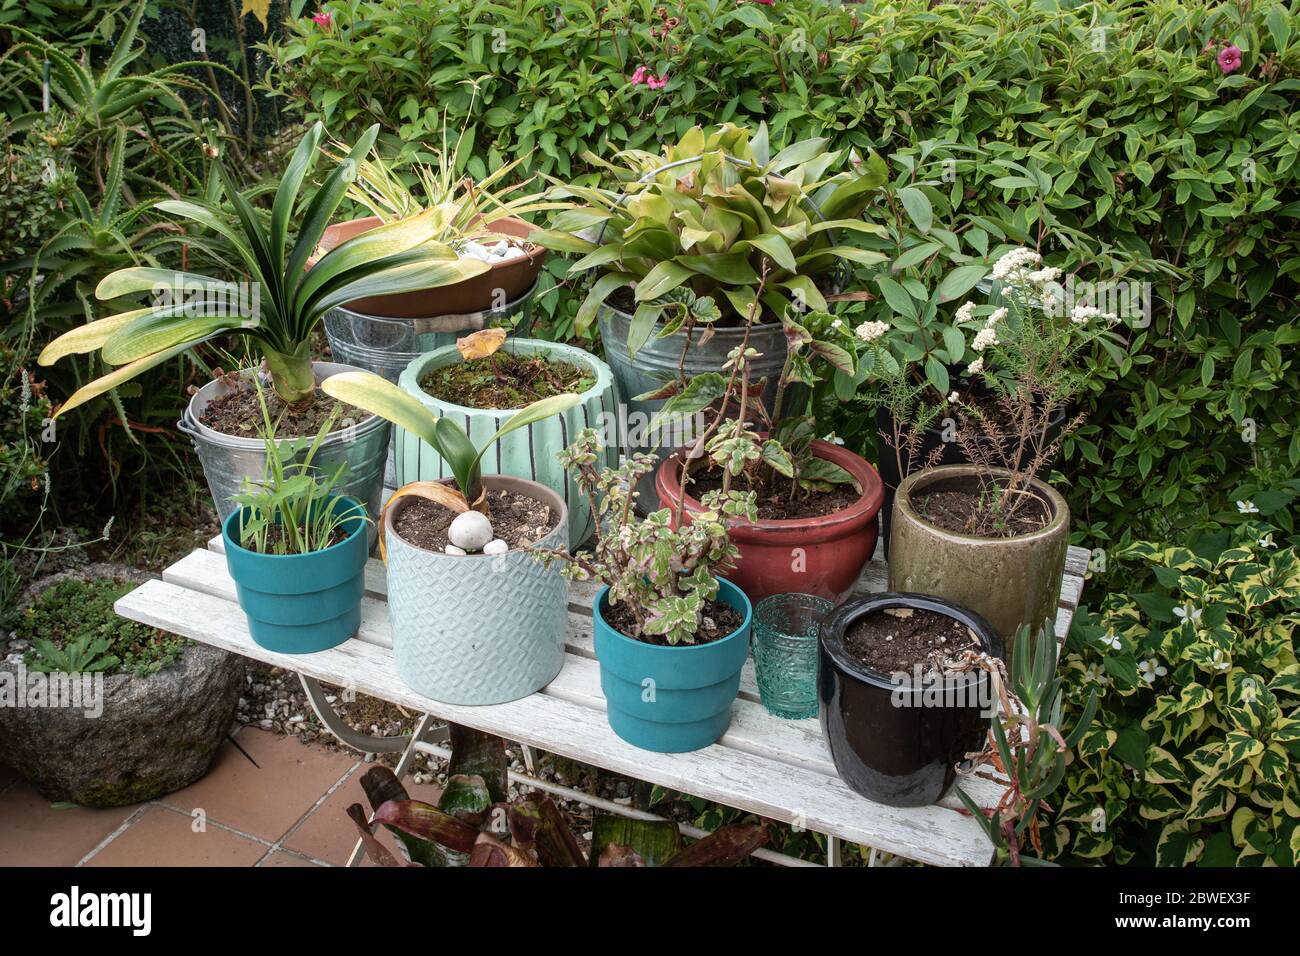 Group of plants and flowers in pot on wooden table. Gardening concept Stock Photo